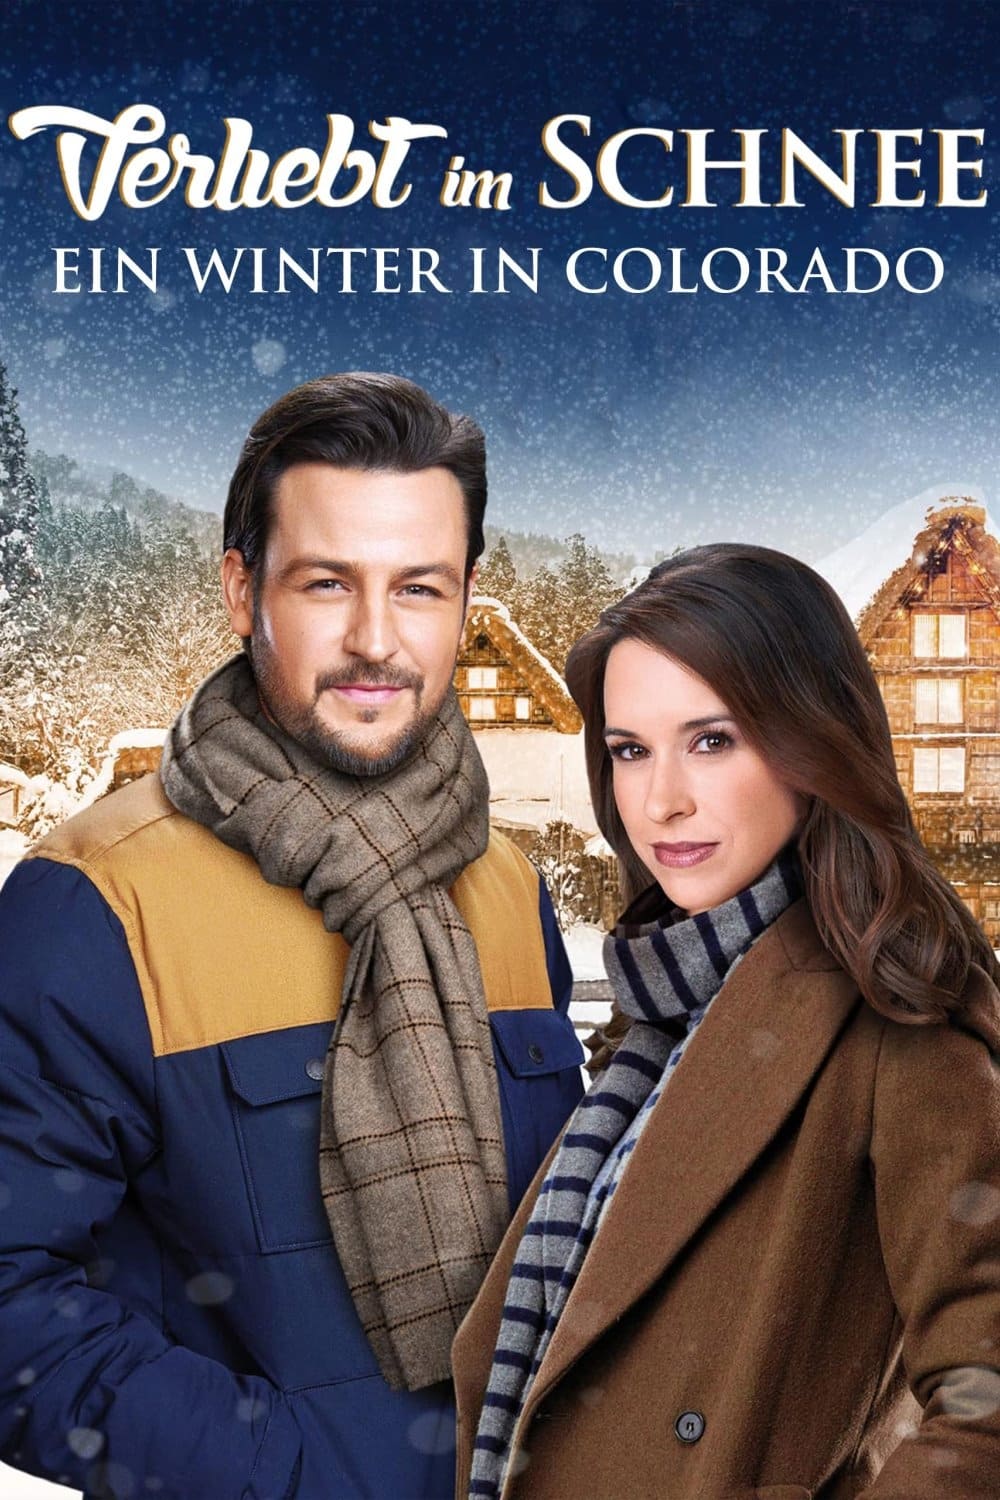 Winter in Vail (2020)